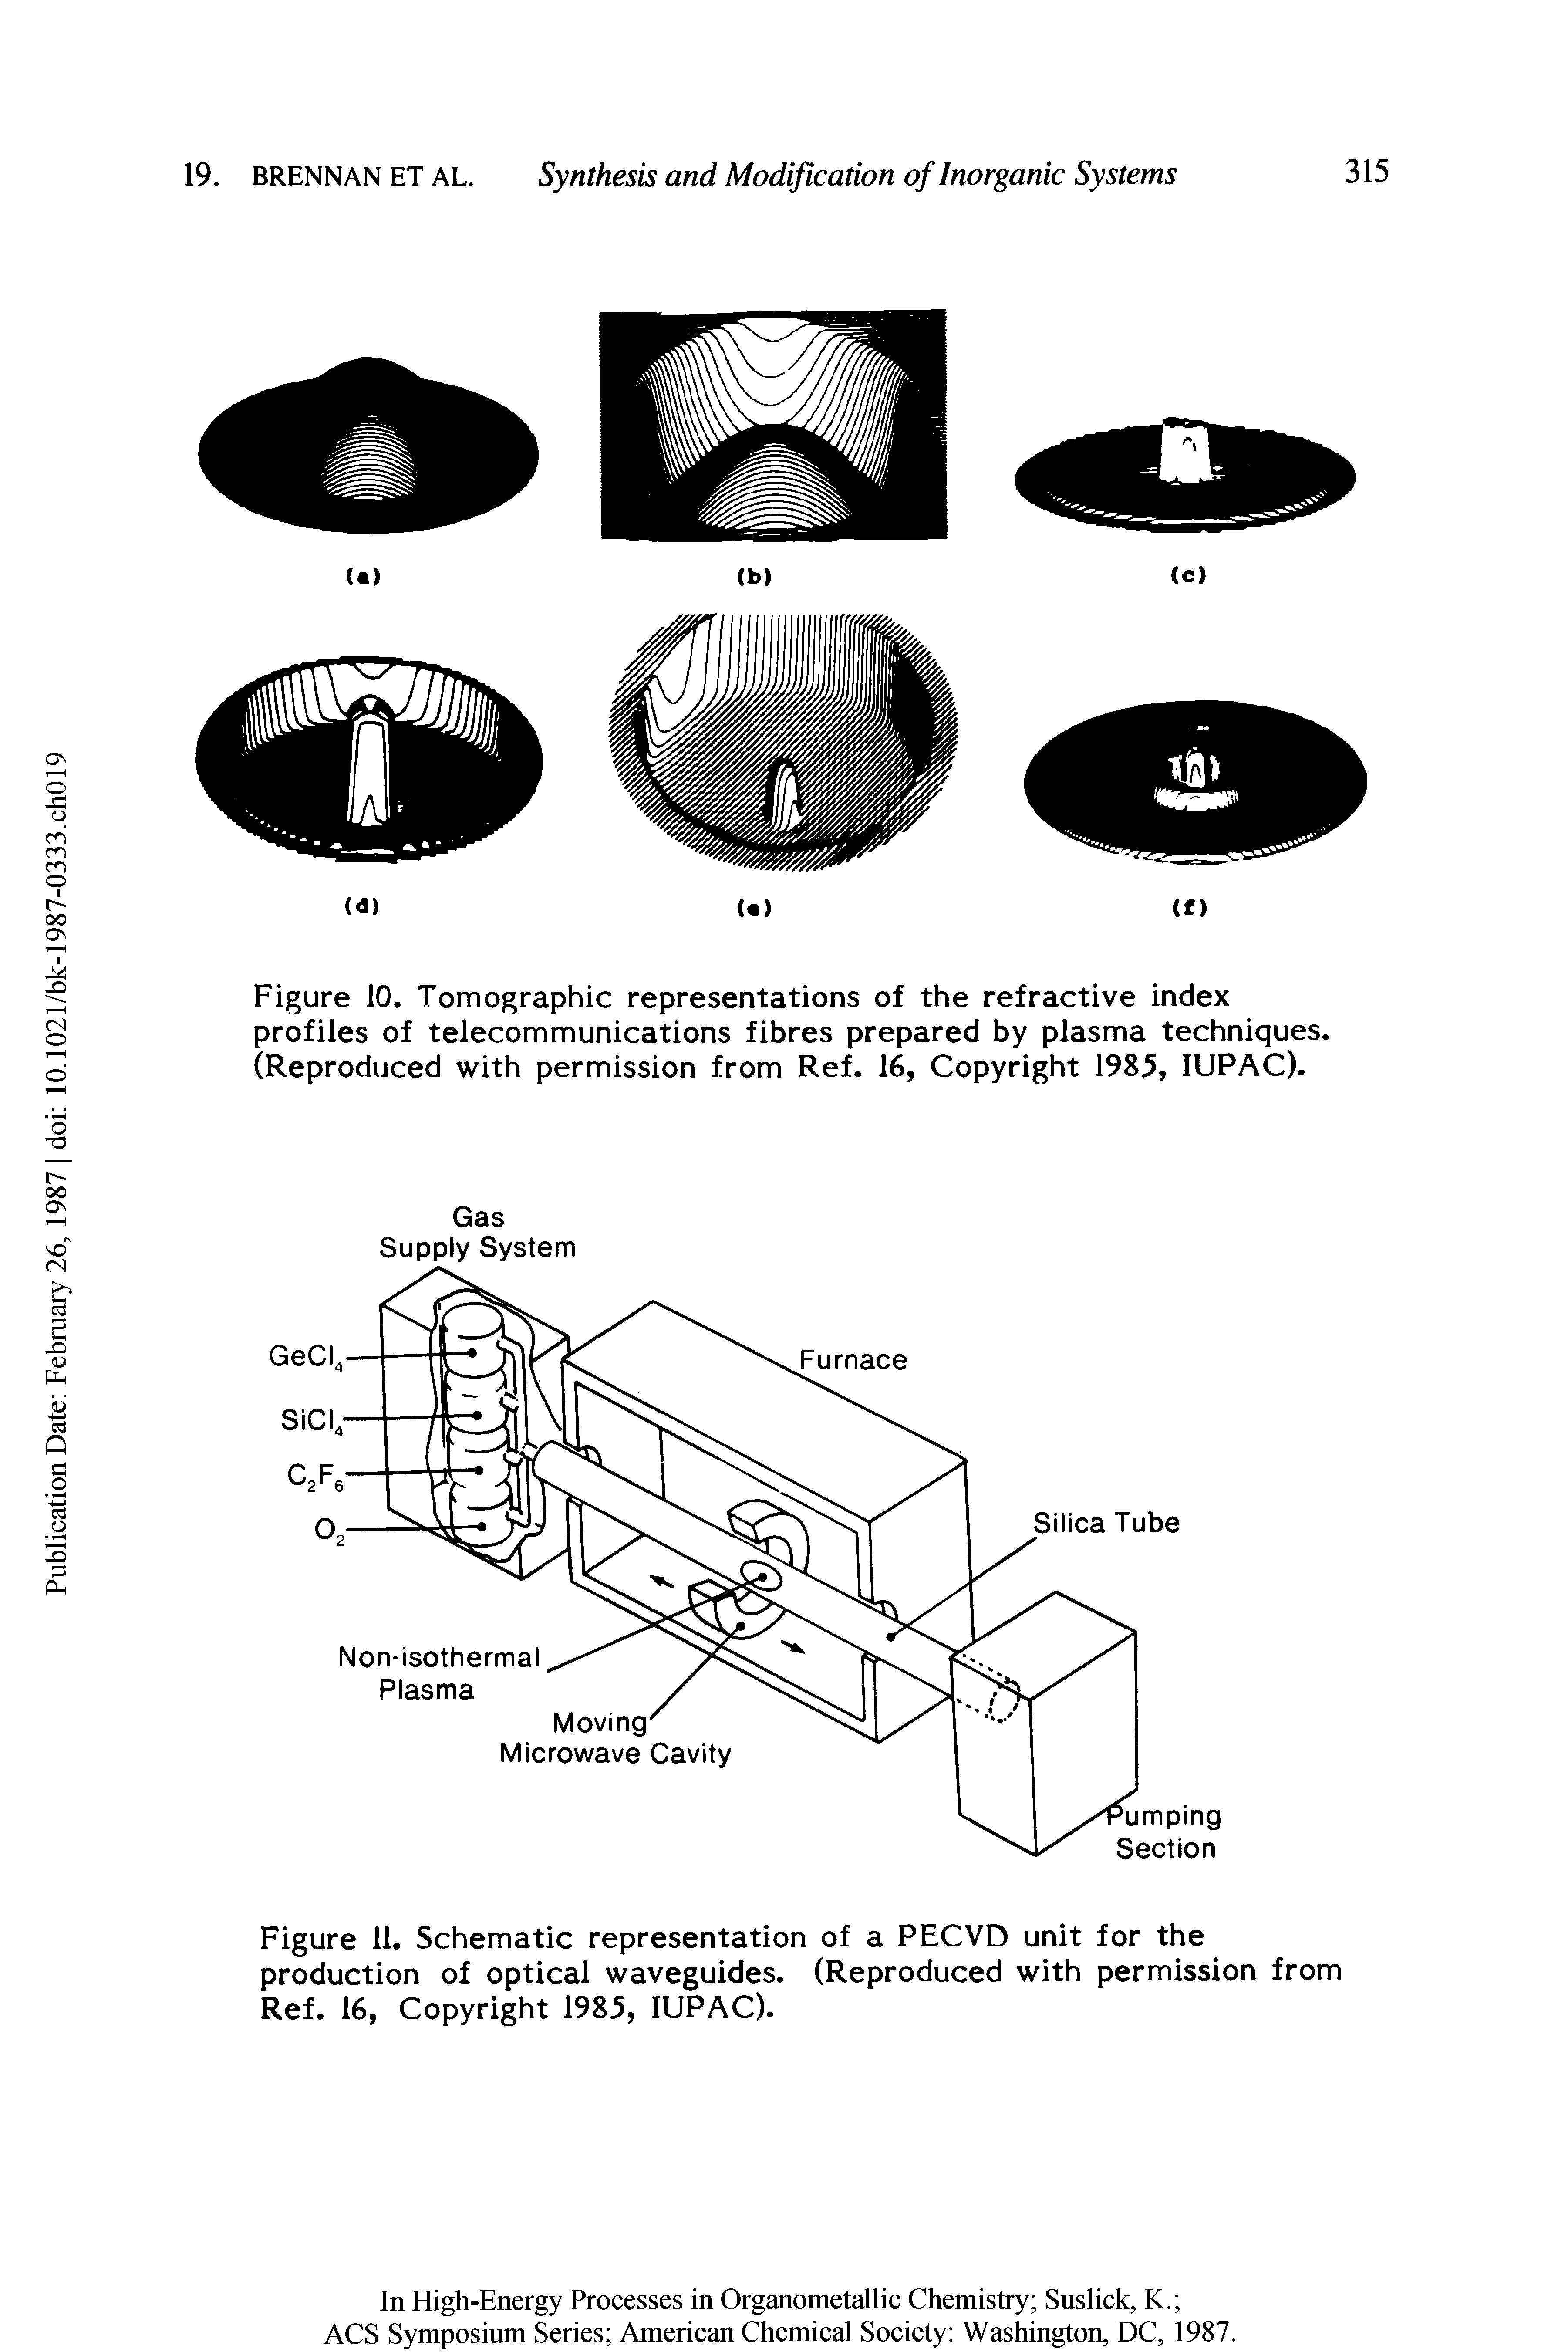 Figure 10. Tomographic representations of the refractive index profiles of telecommunications fibres prepared by plasma techniques. (Reproduced with permission from Ref. 16, Copyright 1985, IUPAC).